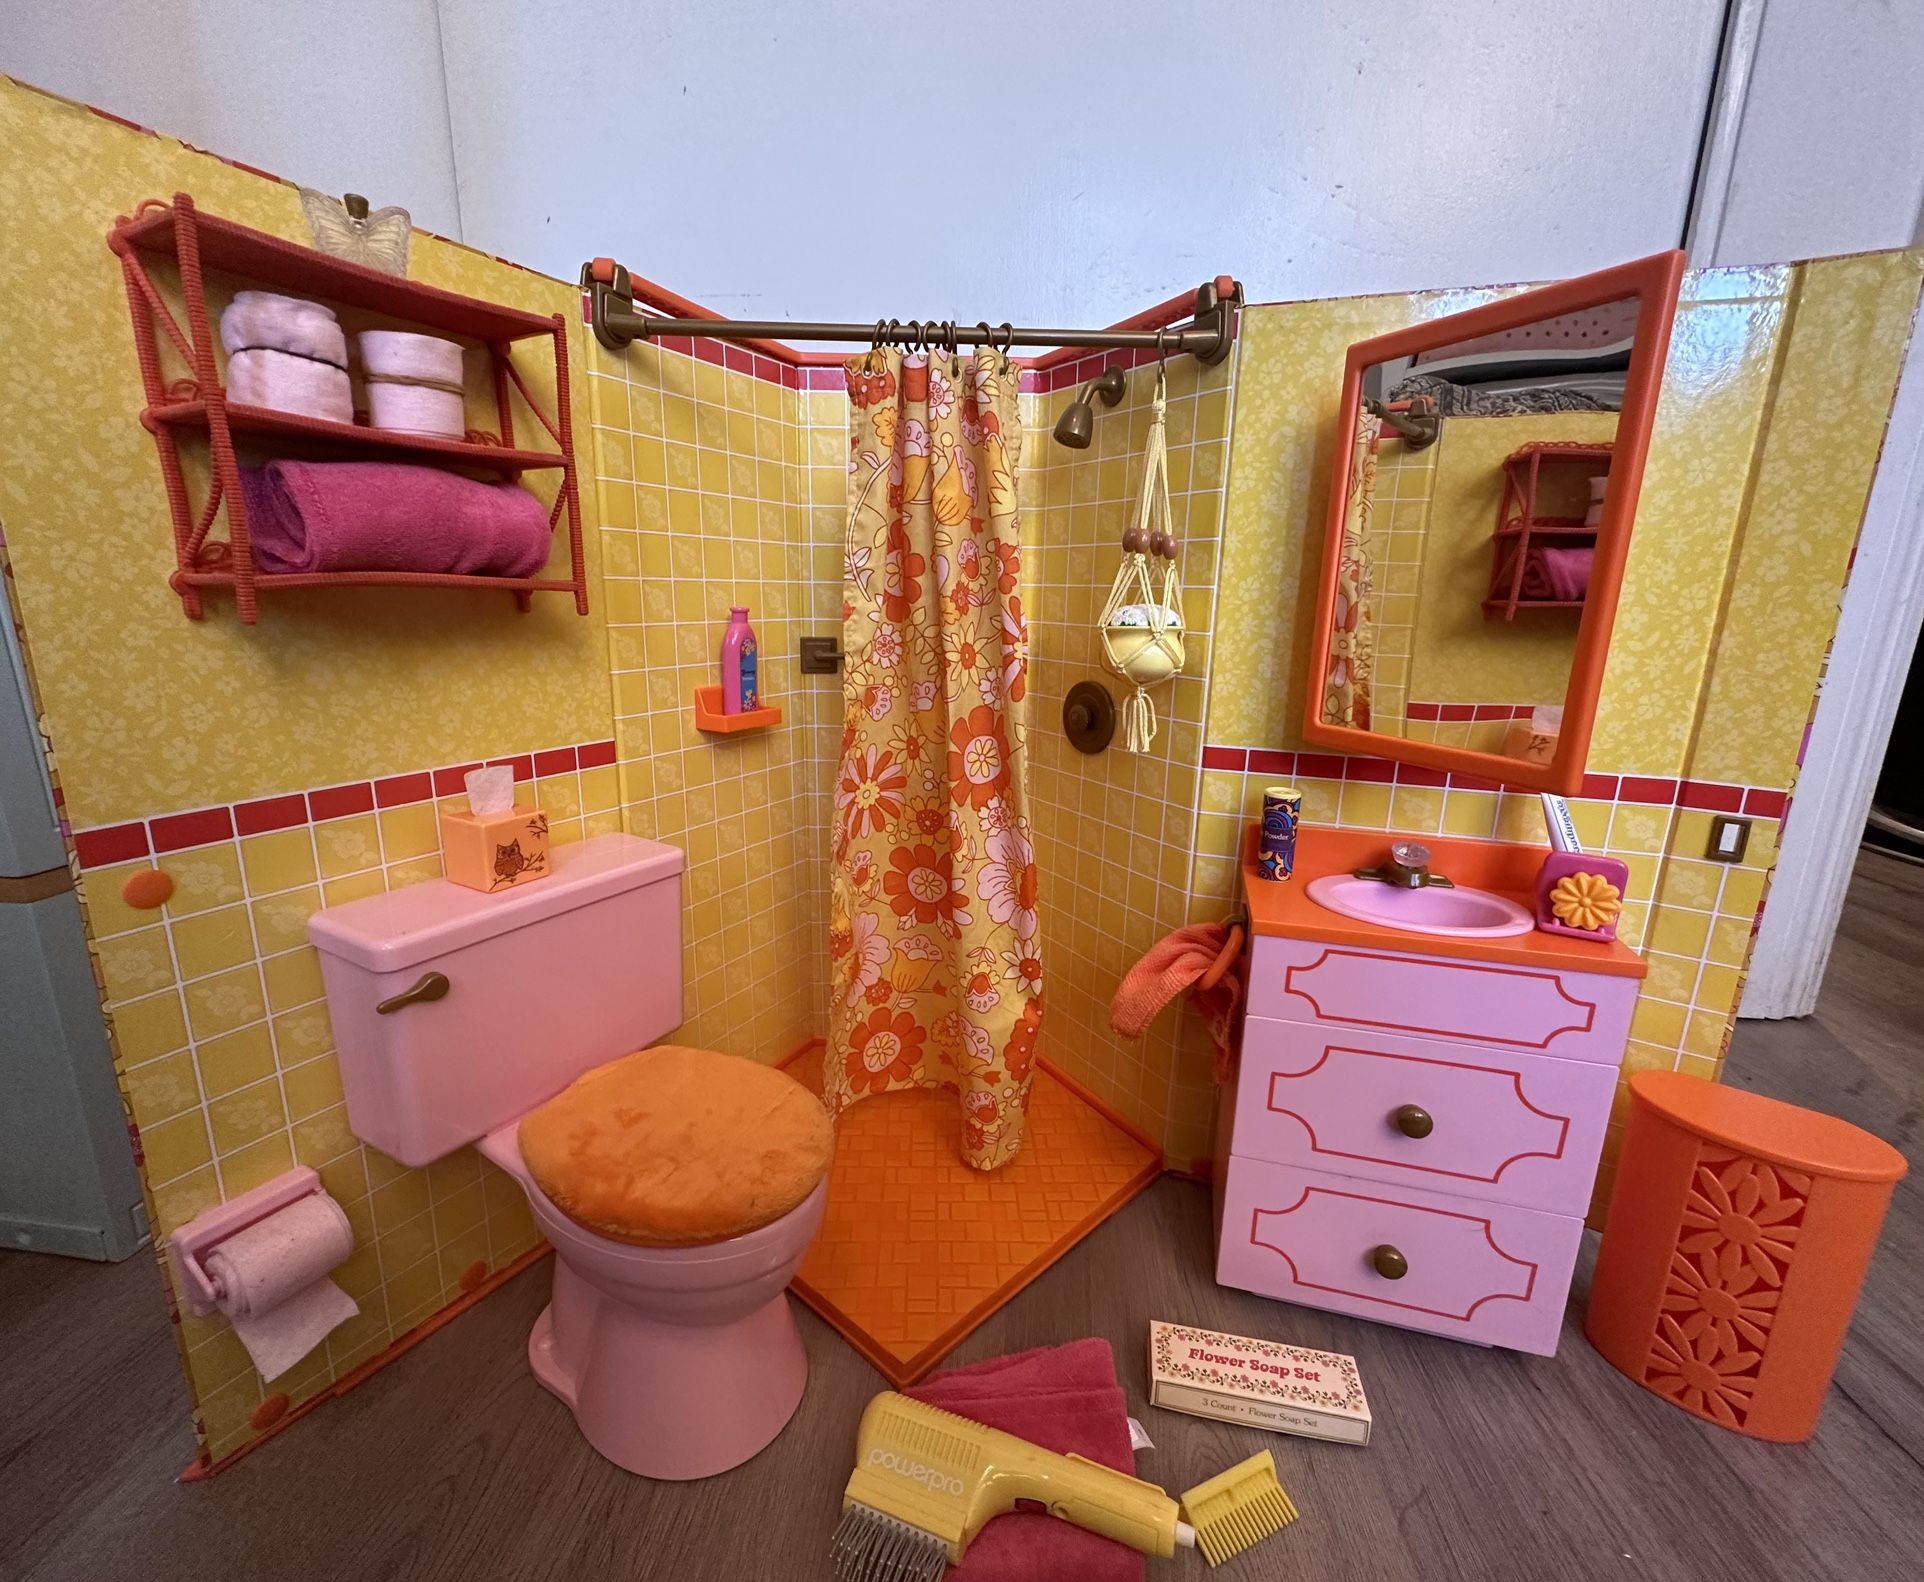 American Girl Doll Julie S Groovy Bathroom Set For Sale In Agoura Hills Ca Offerup